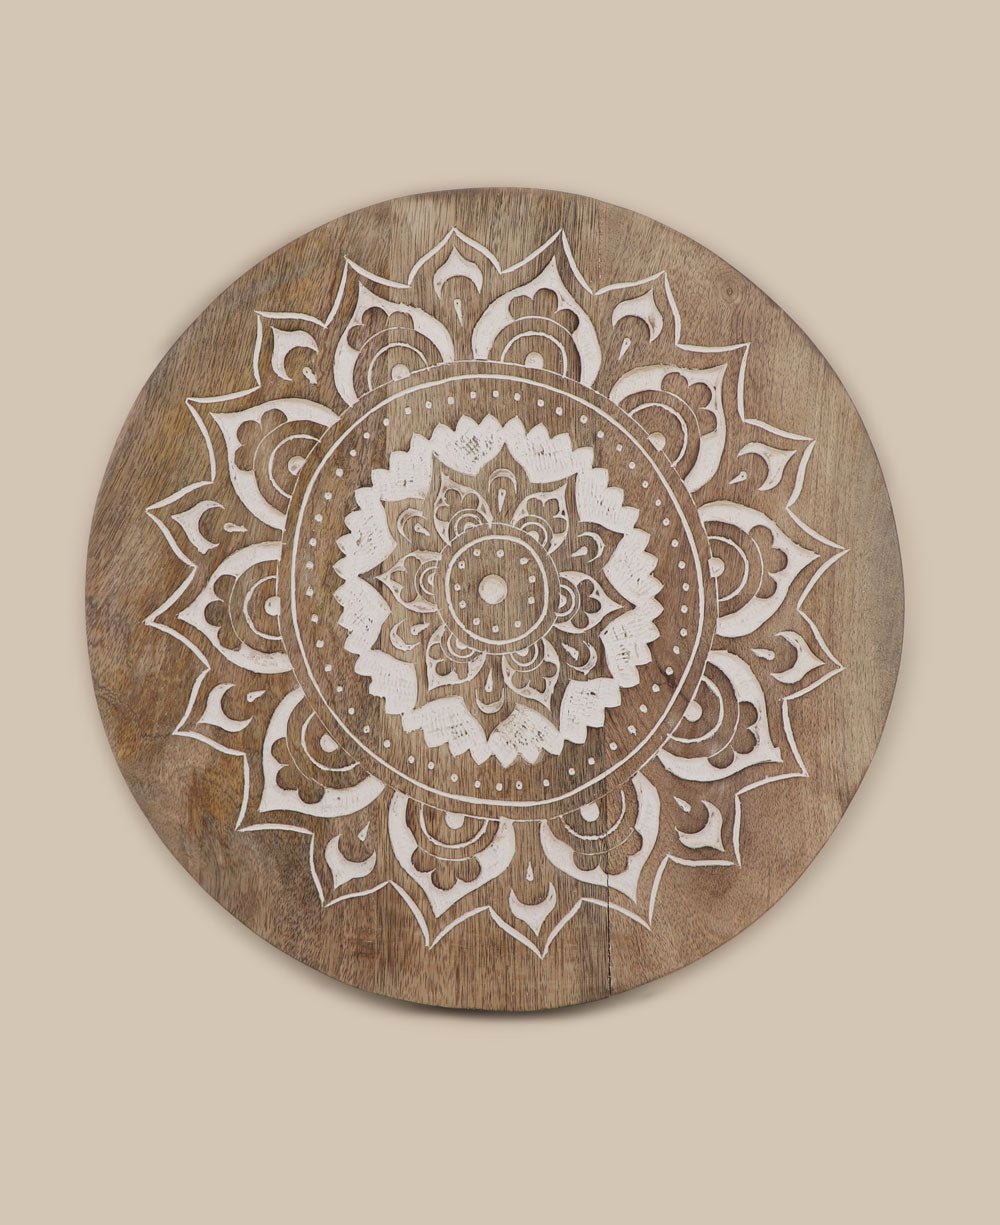 Mandala Crafts Round Wooden Beads for Crafts - Natural Wood